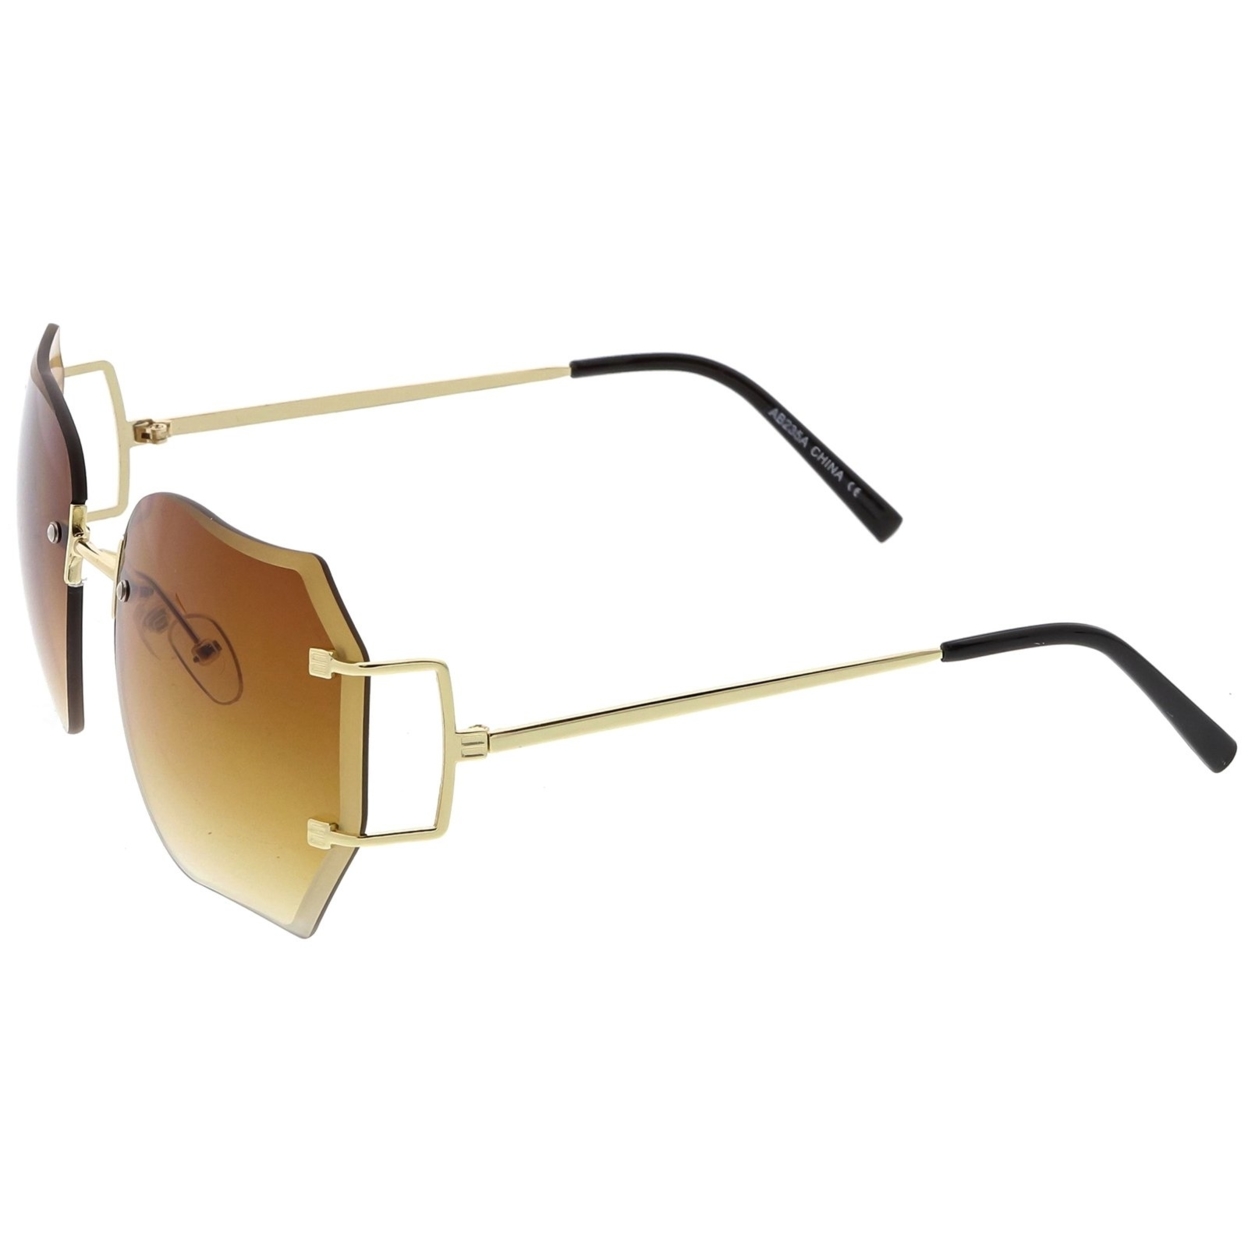 Oversize Rimless Square Sunglasses Slim Metal Arms Beveled Gradient Lens 61mm - Gold / Red Gradient